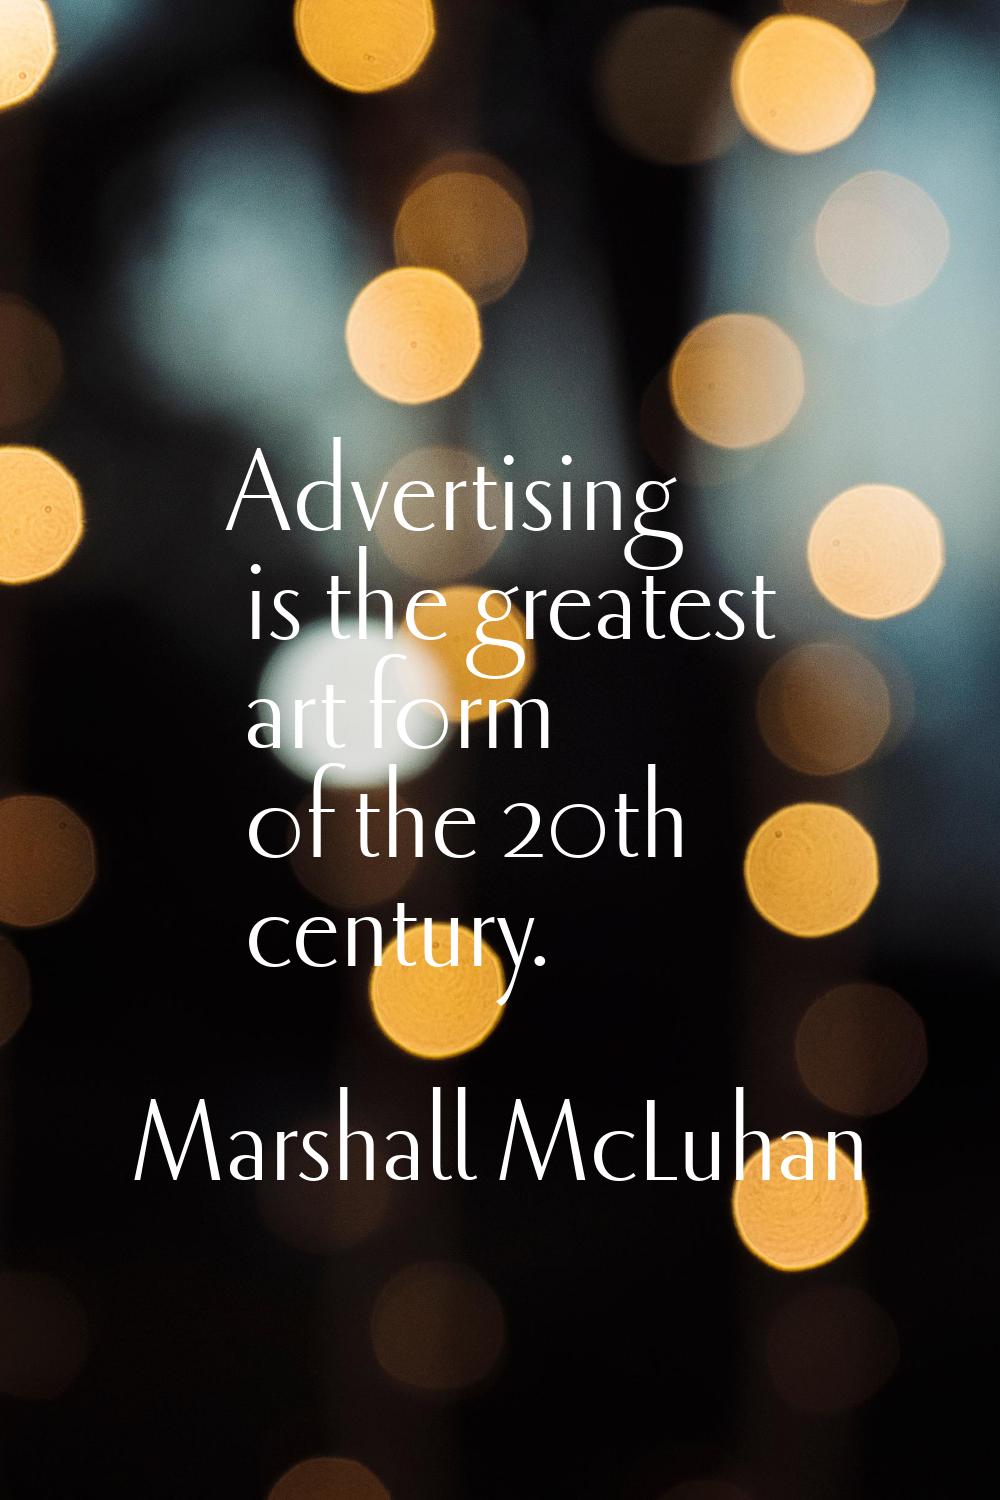 Advertising is the greatest art form of the 20th century.